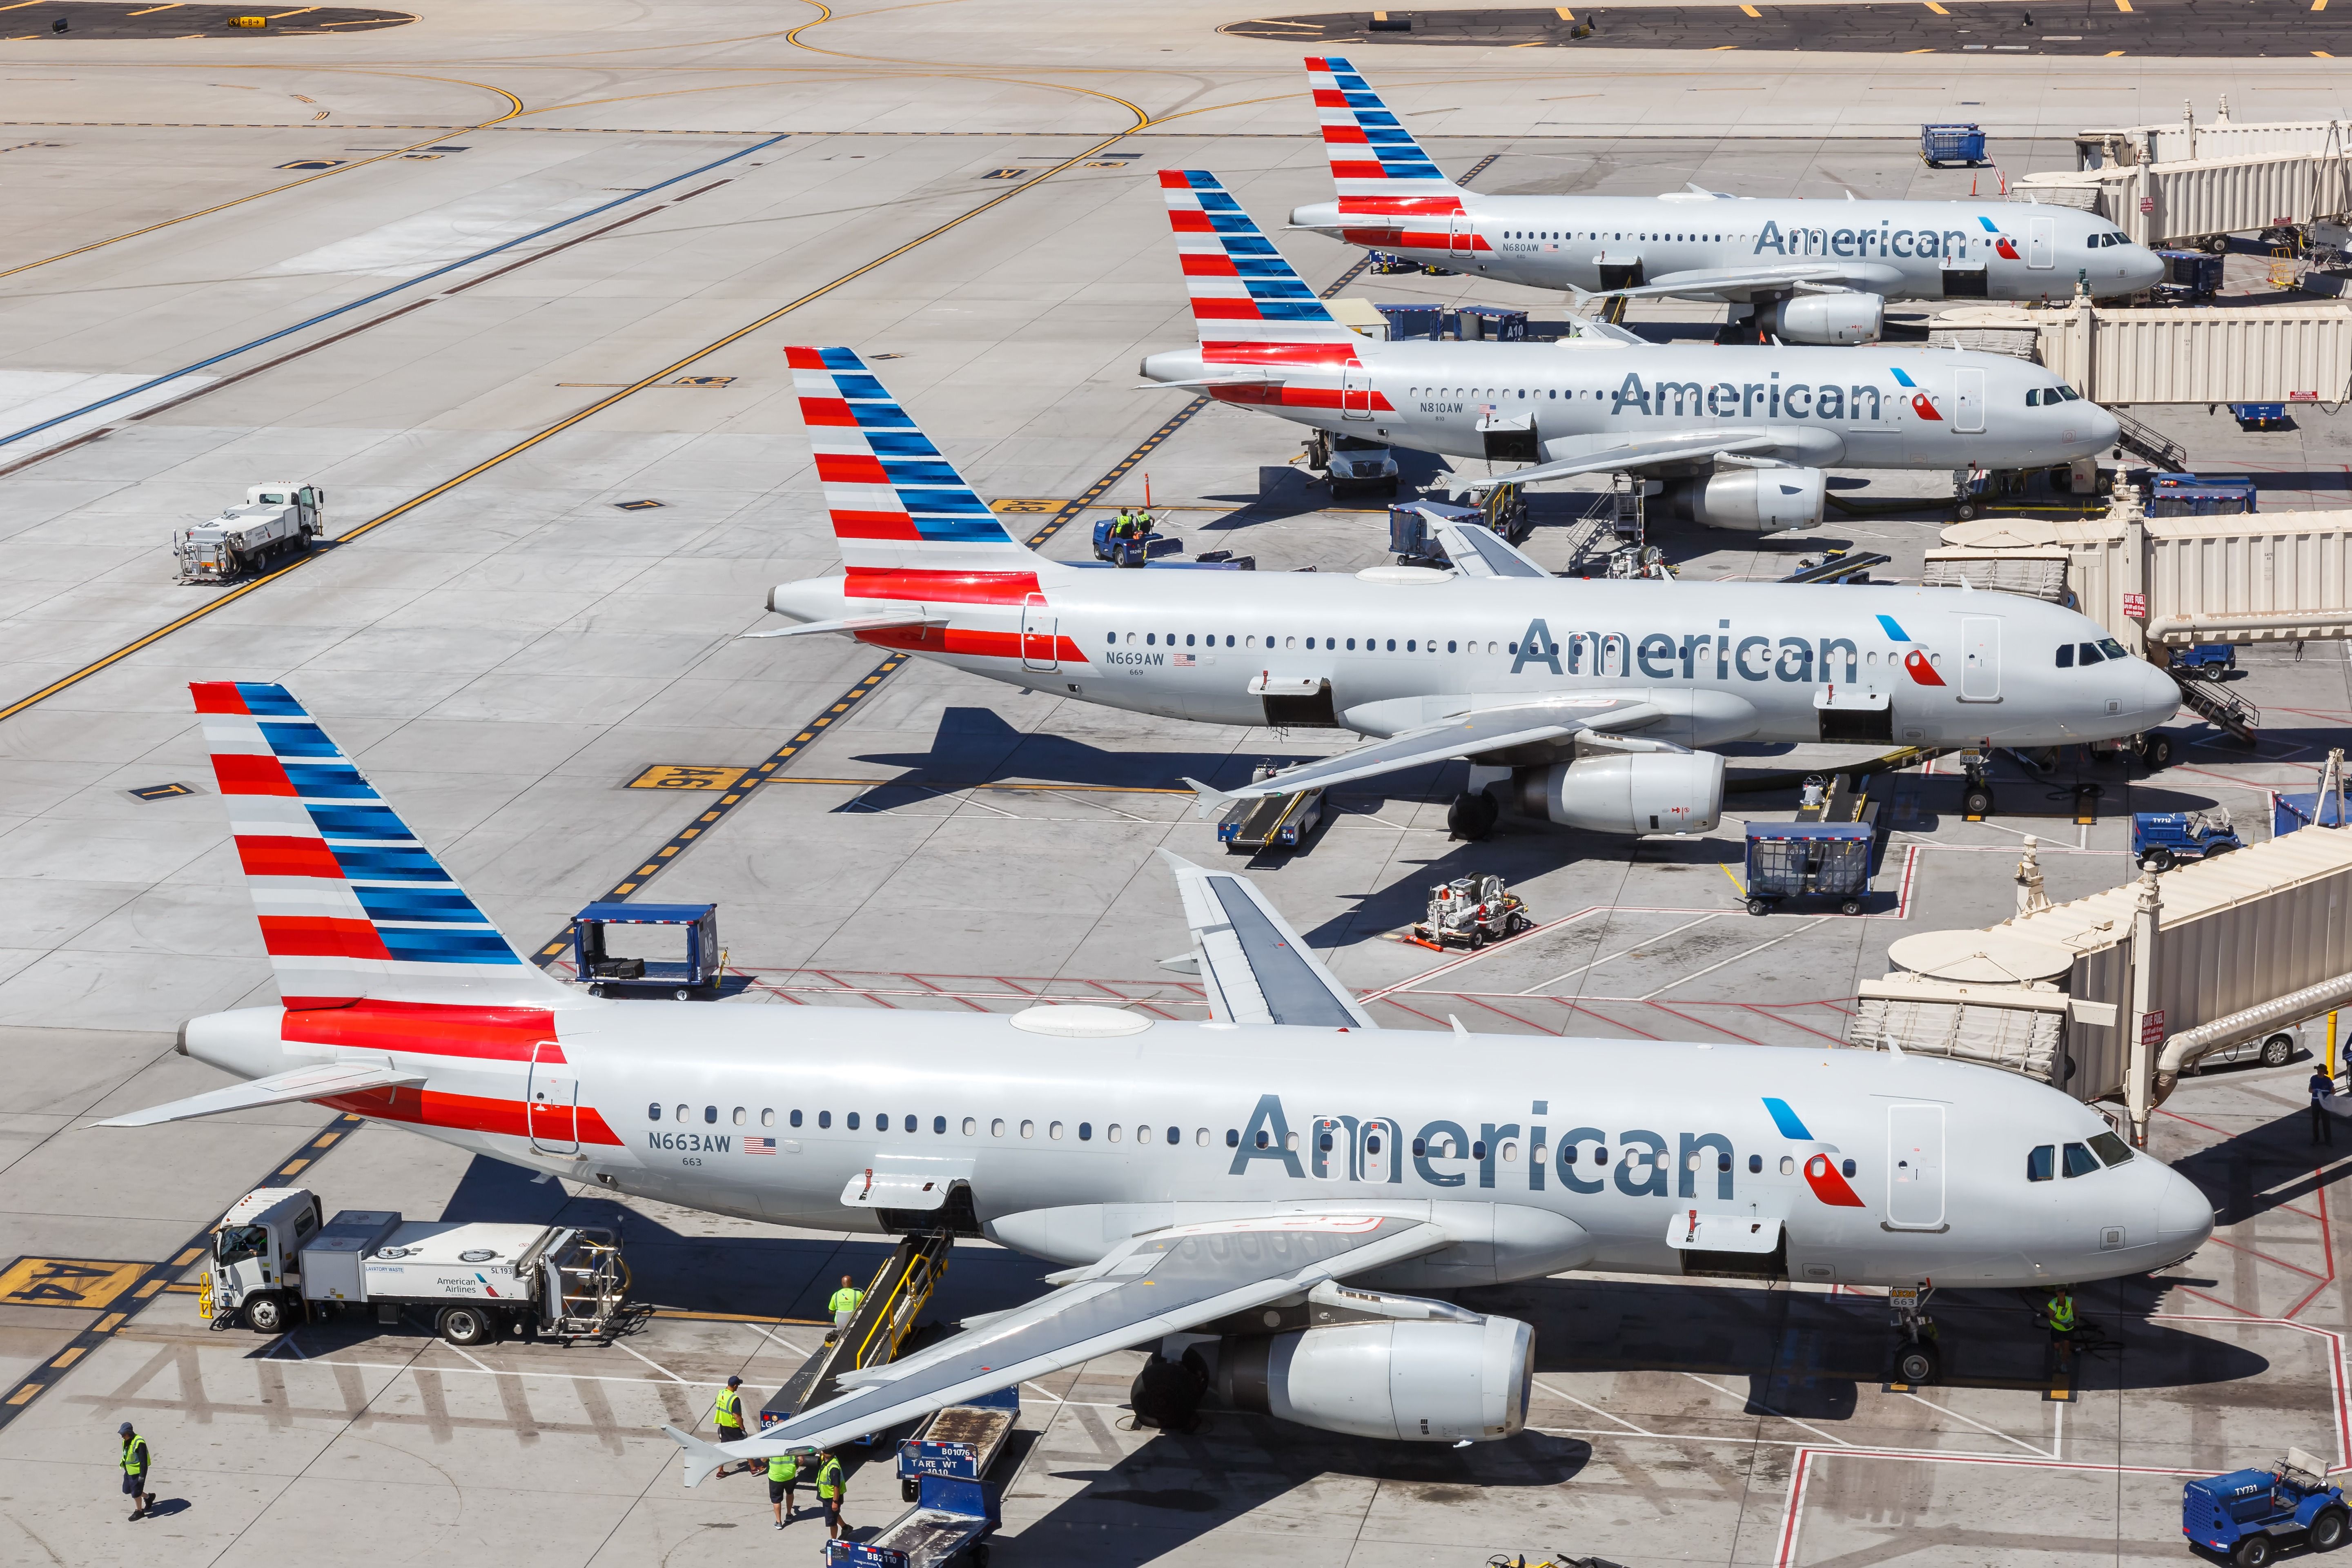 American Airlines aircraft lined up